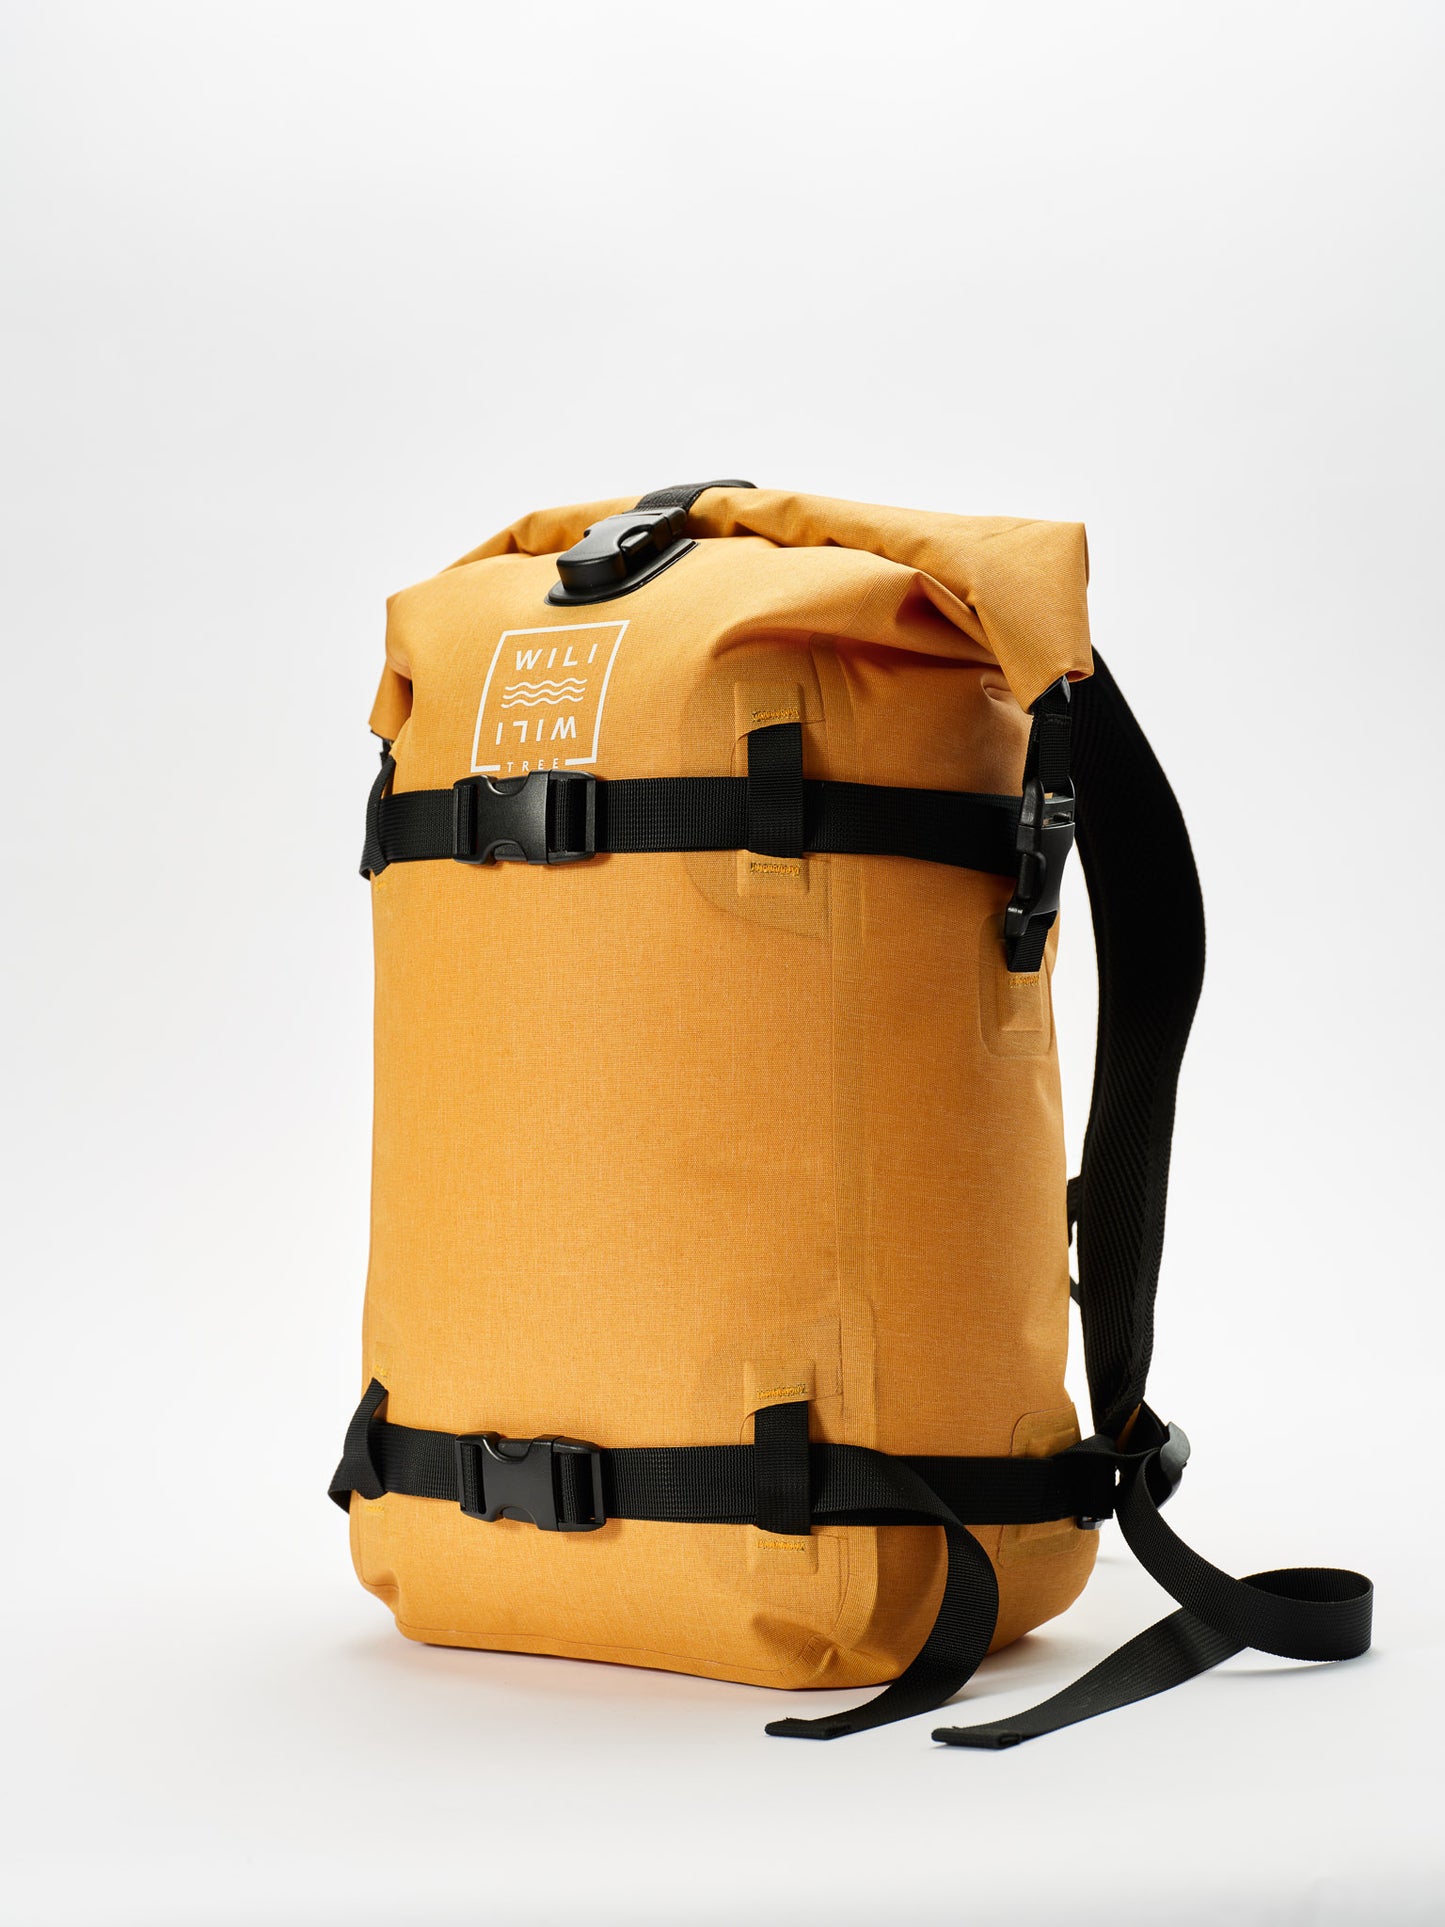 Dry Bag - Backpack Adventure - 25L - Sunset Yellow